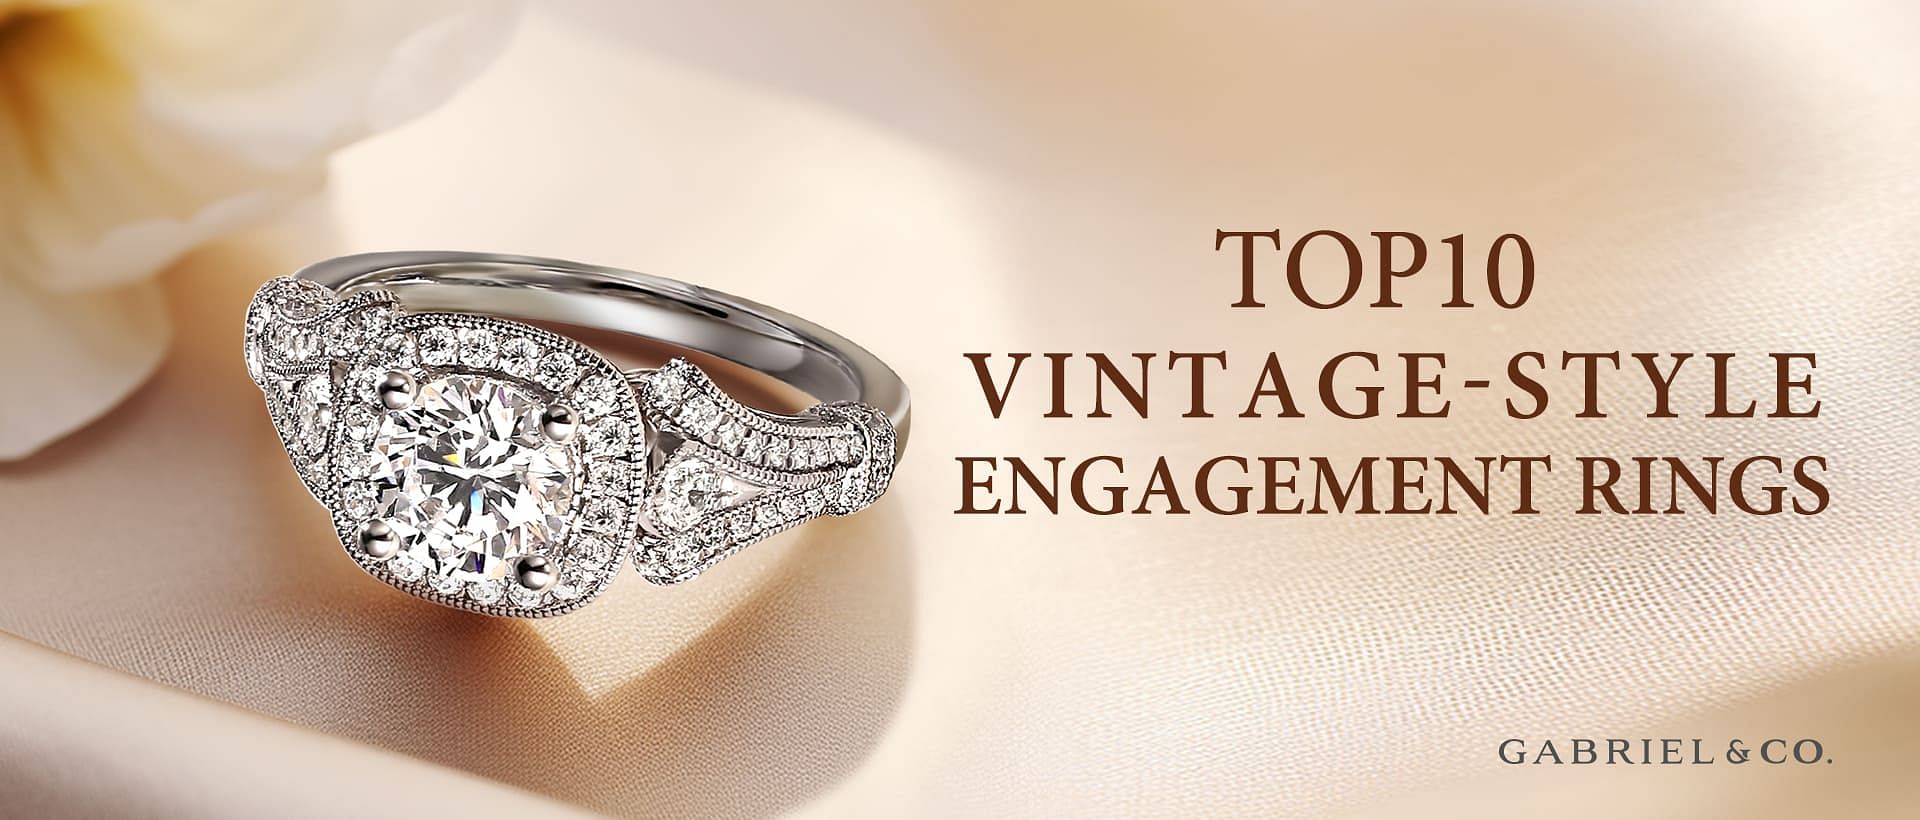 The Best Unique Engagement Rings: The Ultimate Guide | PORTER